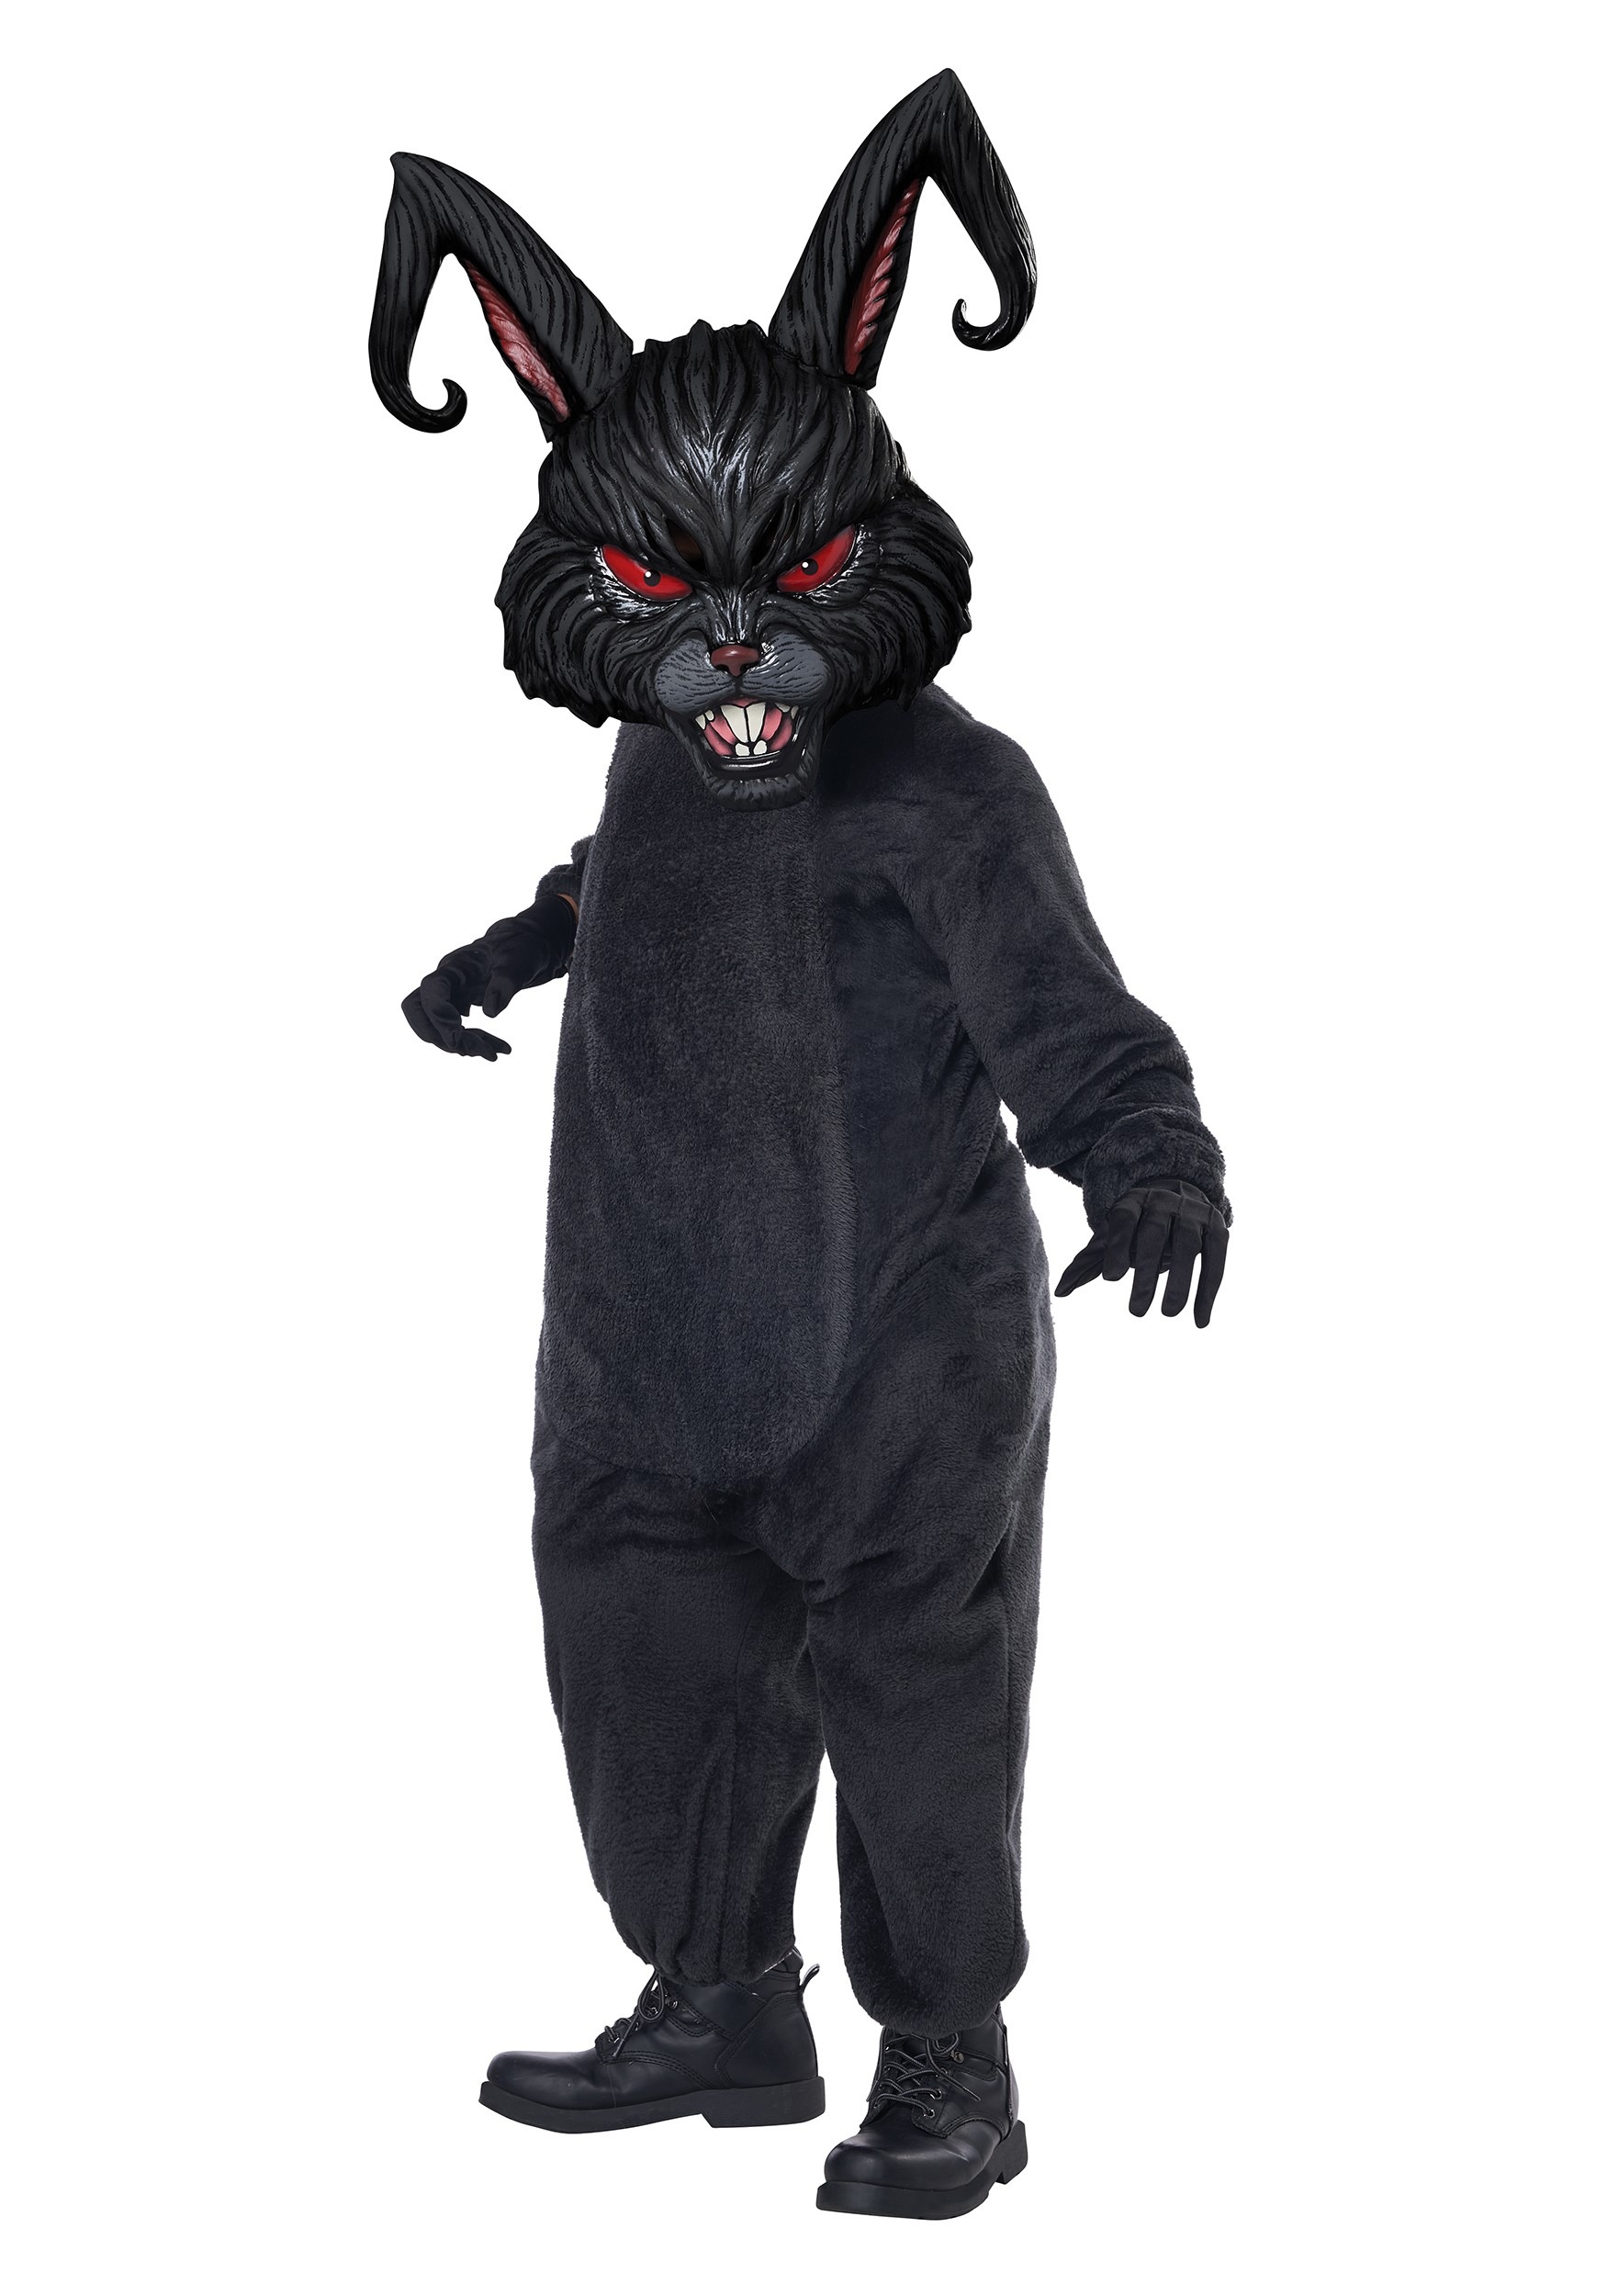 Bad Hare Day Costume for Kids